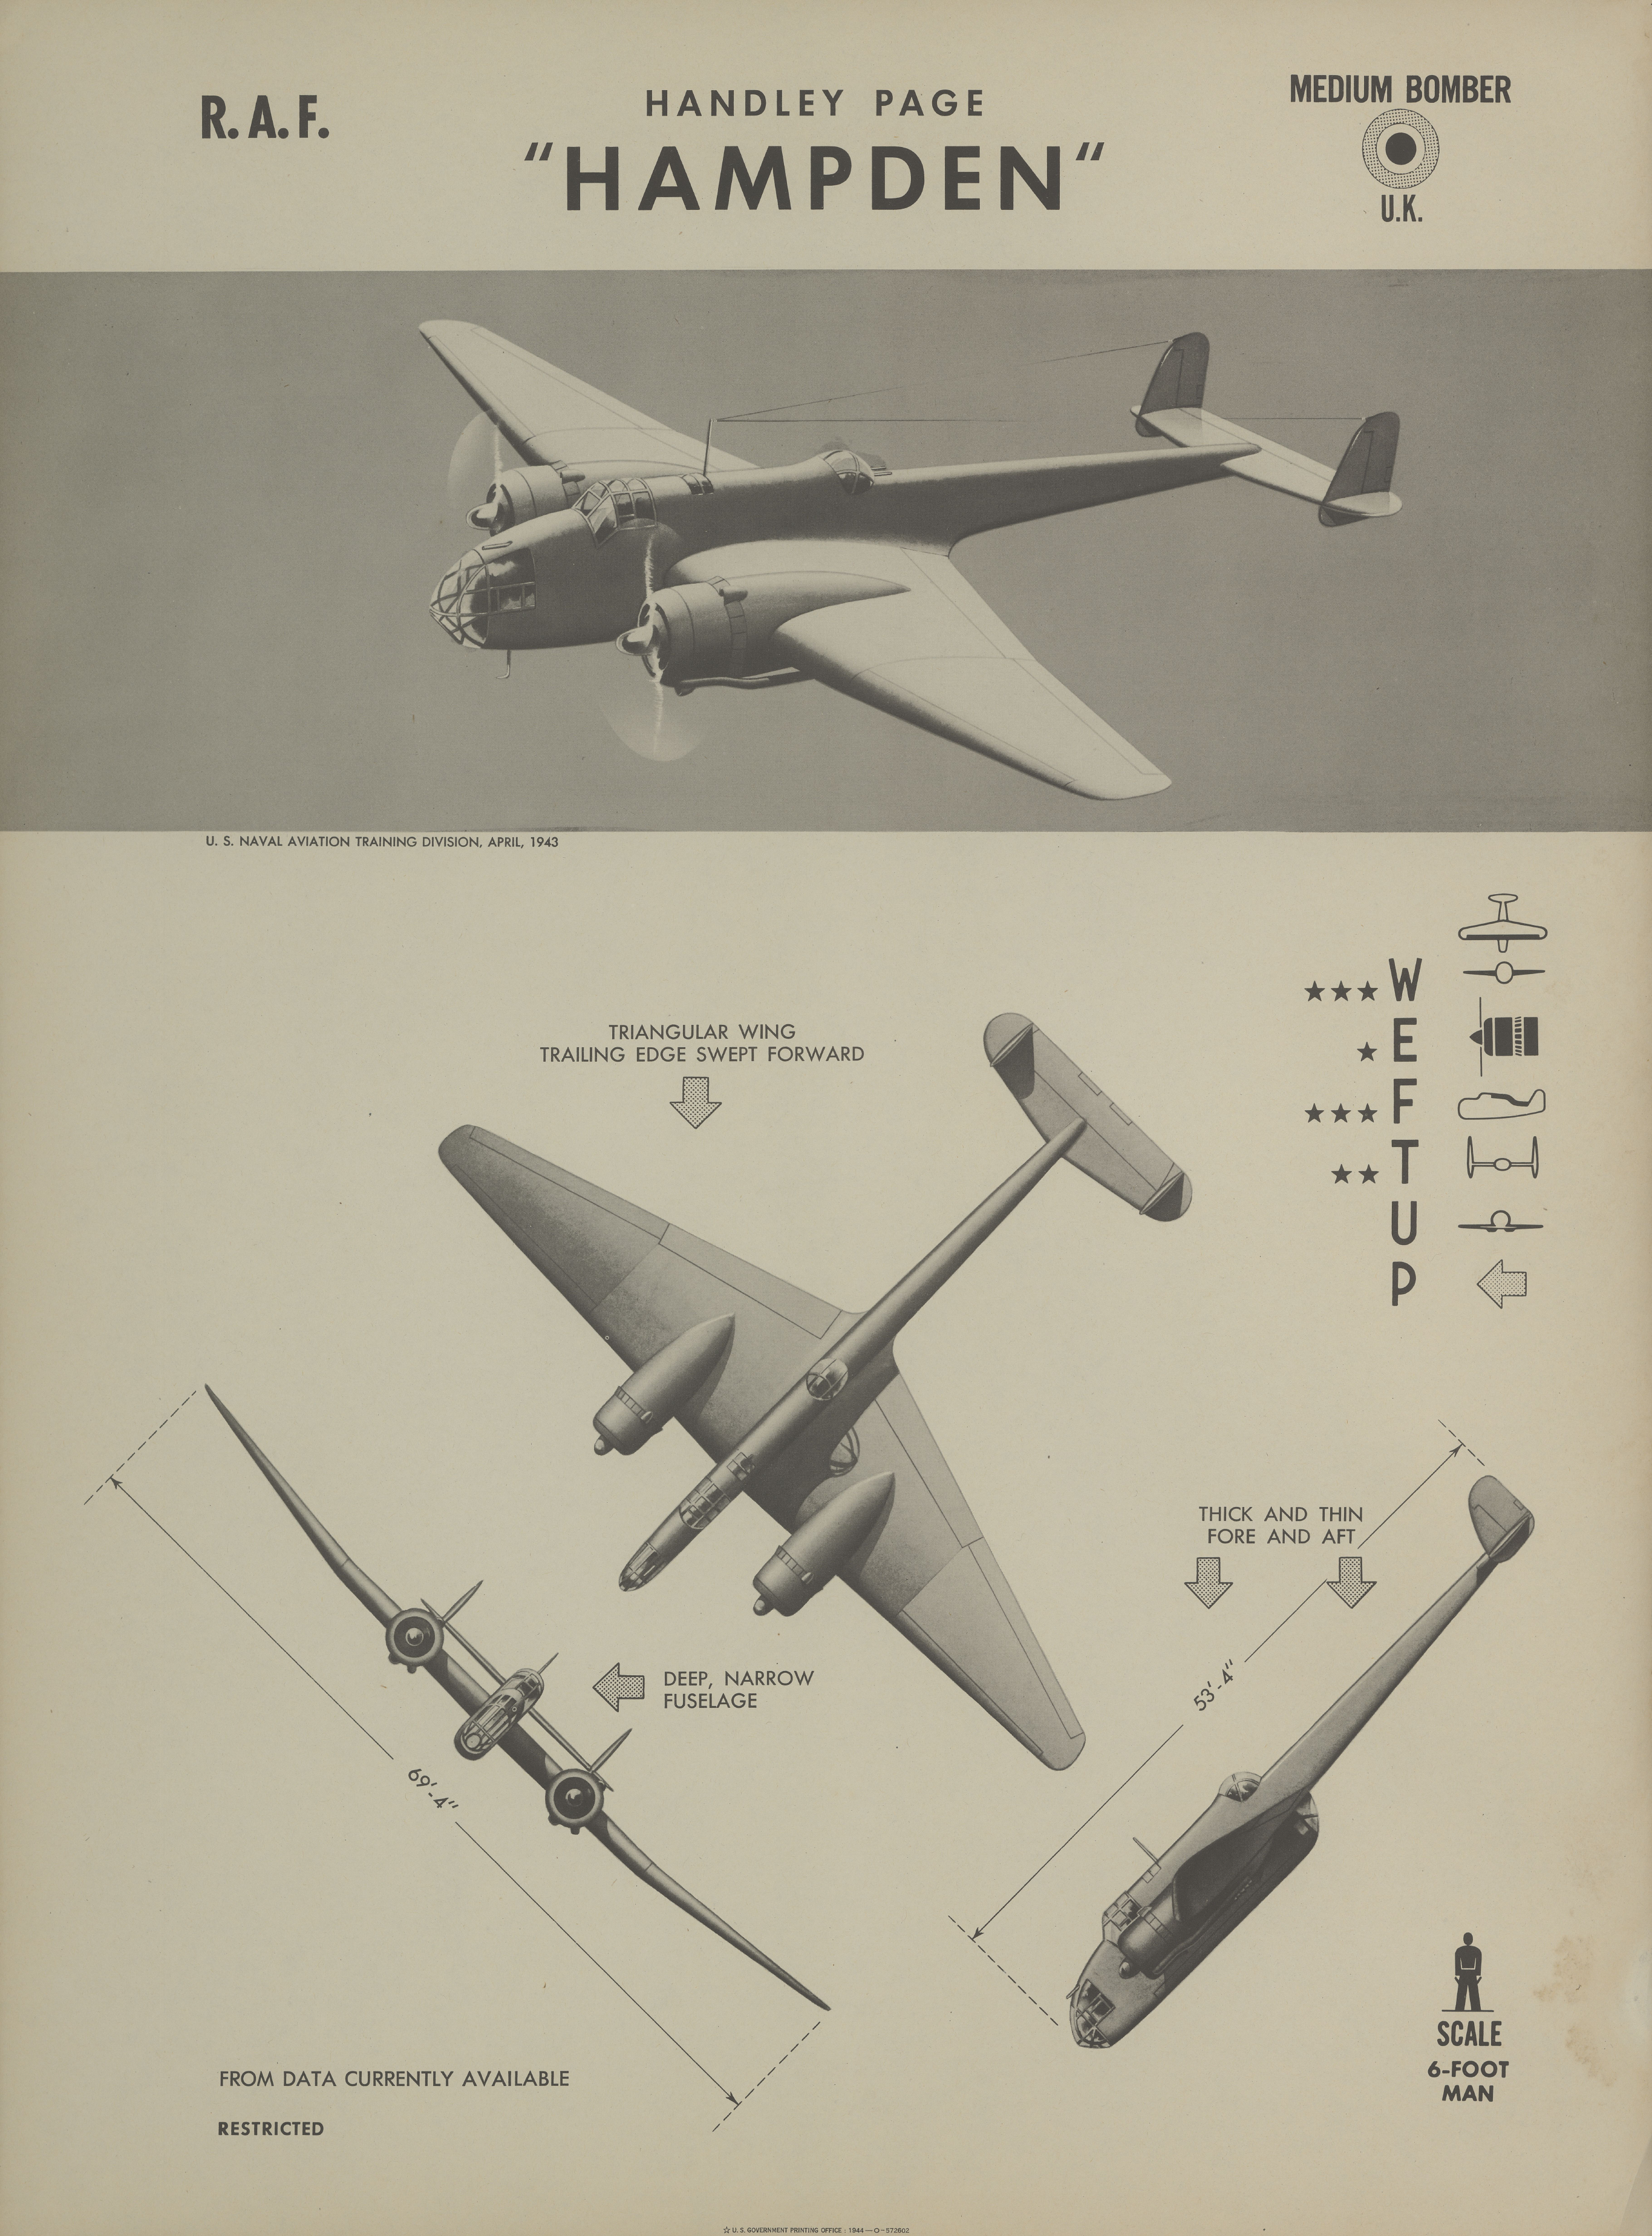 Sample page 1 from AirCorps Library document: Handley Page Hampden Recognition Poster